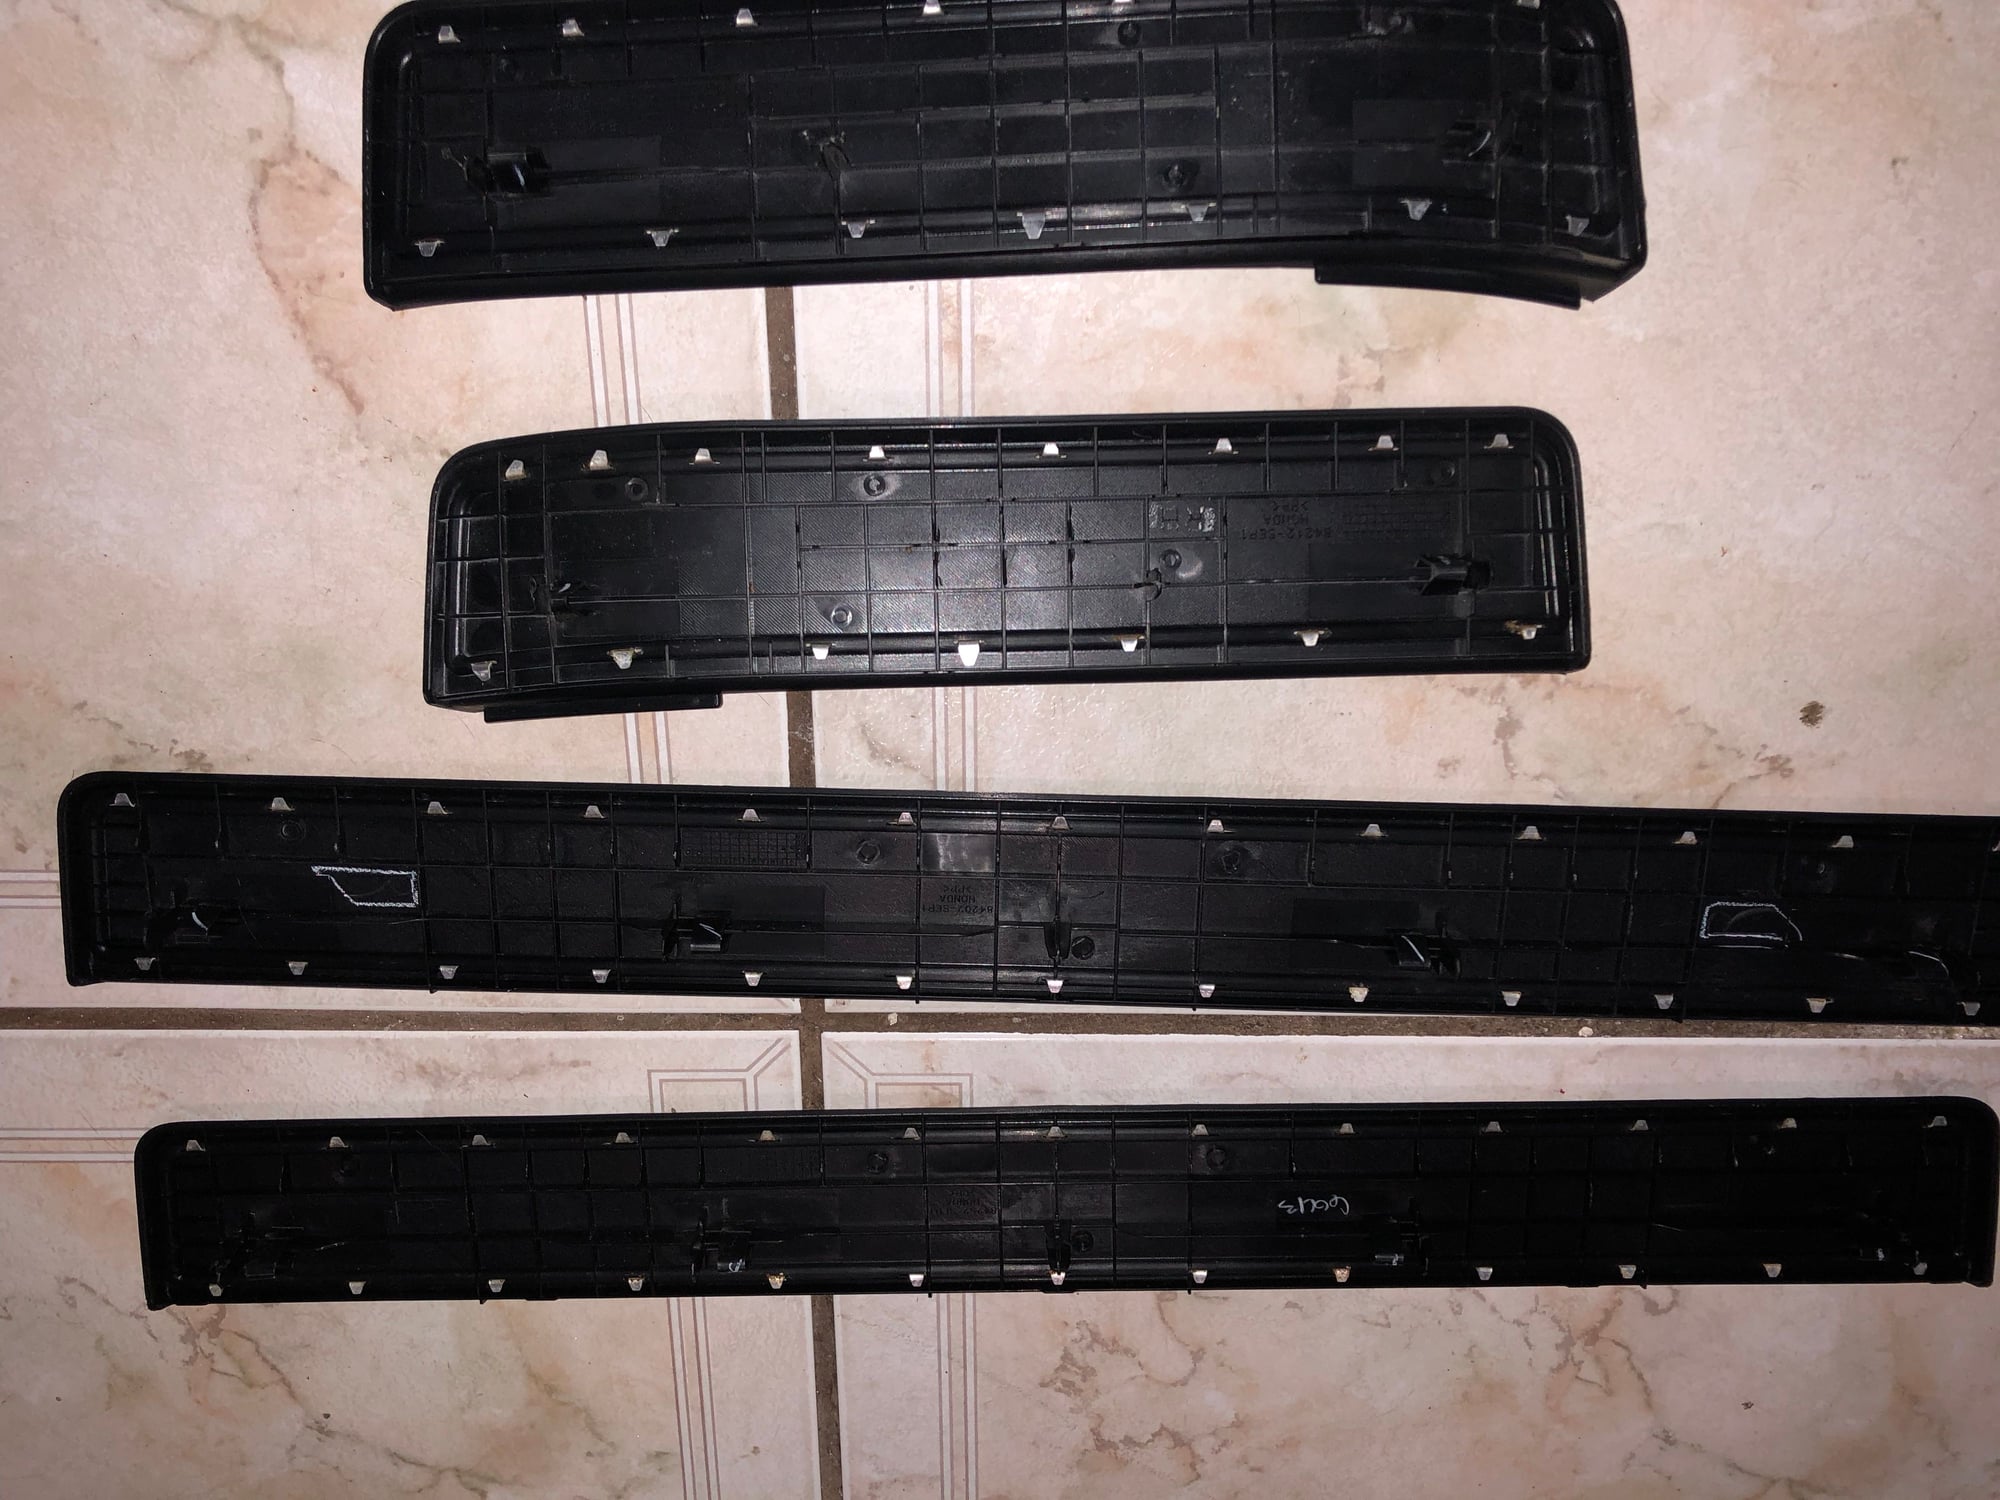 Interior/Upholstery - EXPIRED FS: Acura TL 3G Door Sills Steppers - Used - 2004 to 2008 Acura TL - Miramar, FL 33023, United States